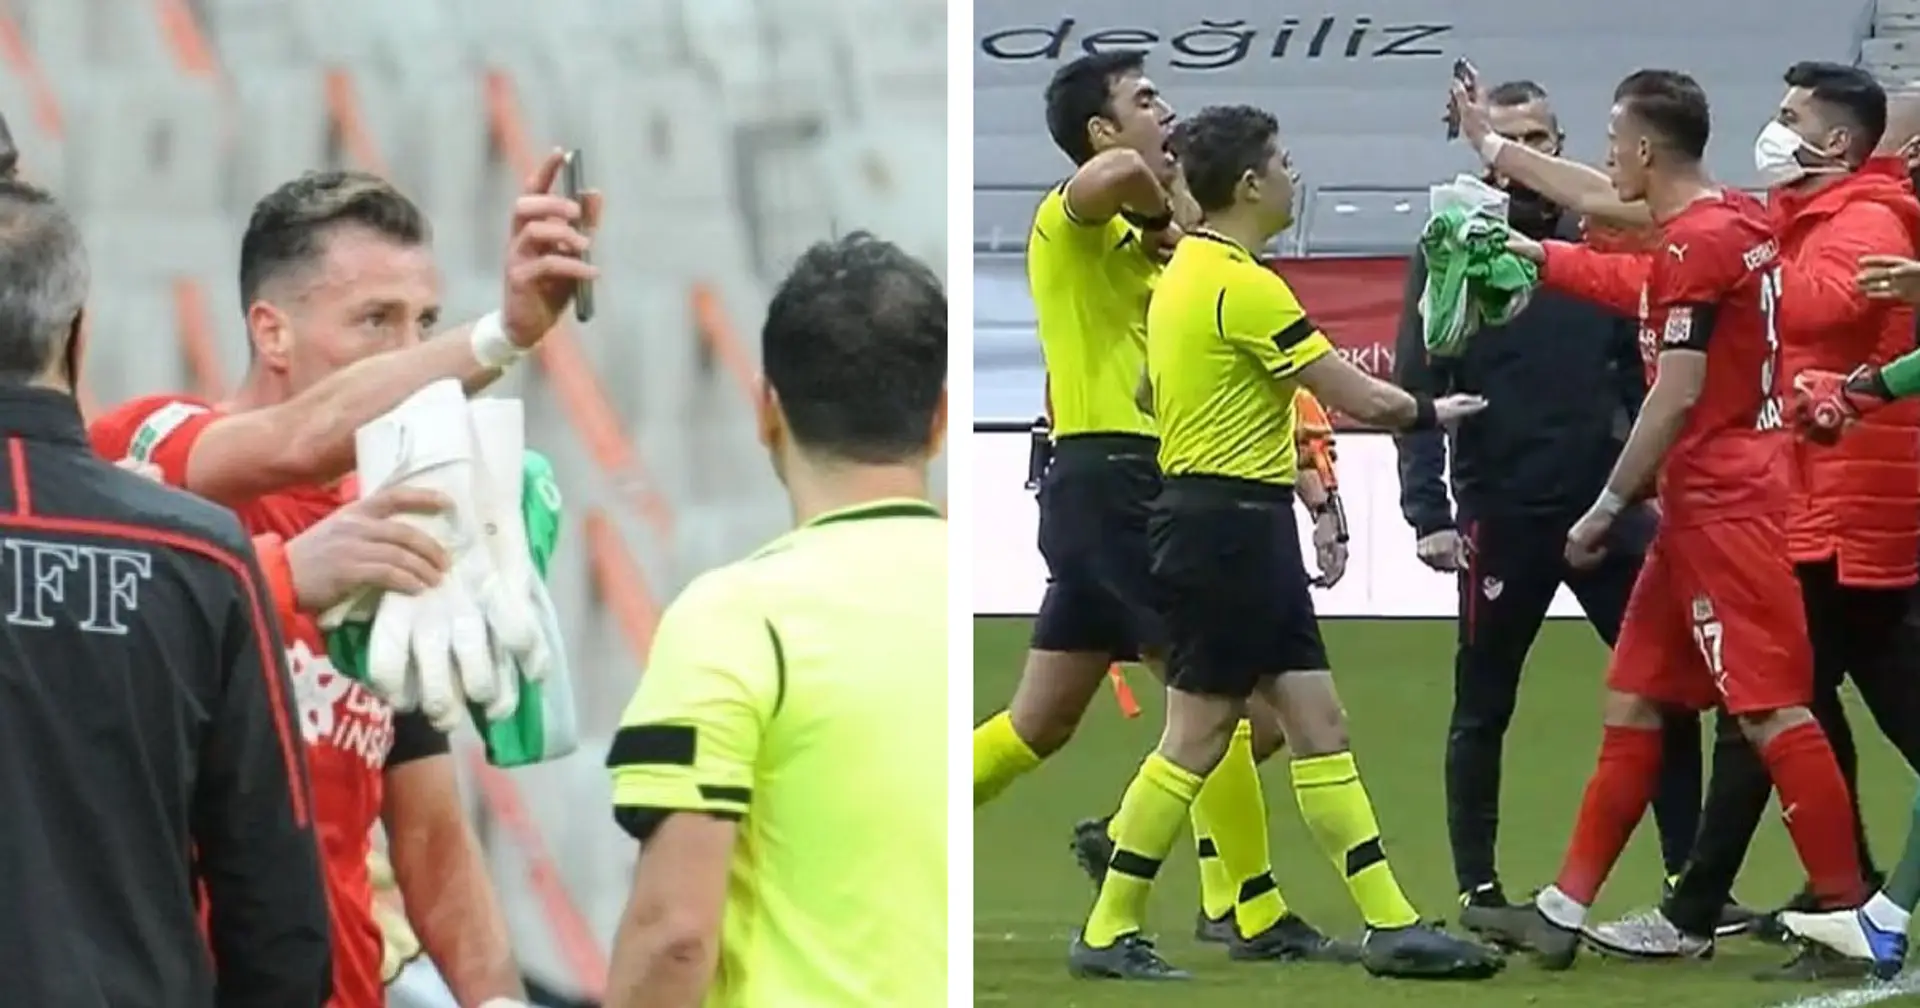 Footballer bizarrely smashes phone on pitch trying to prove his point, gets sent off